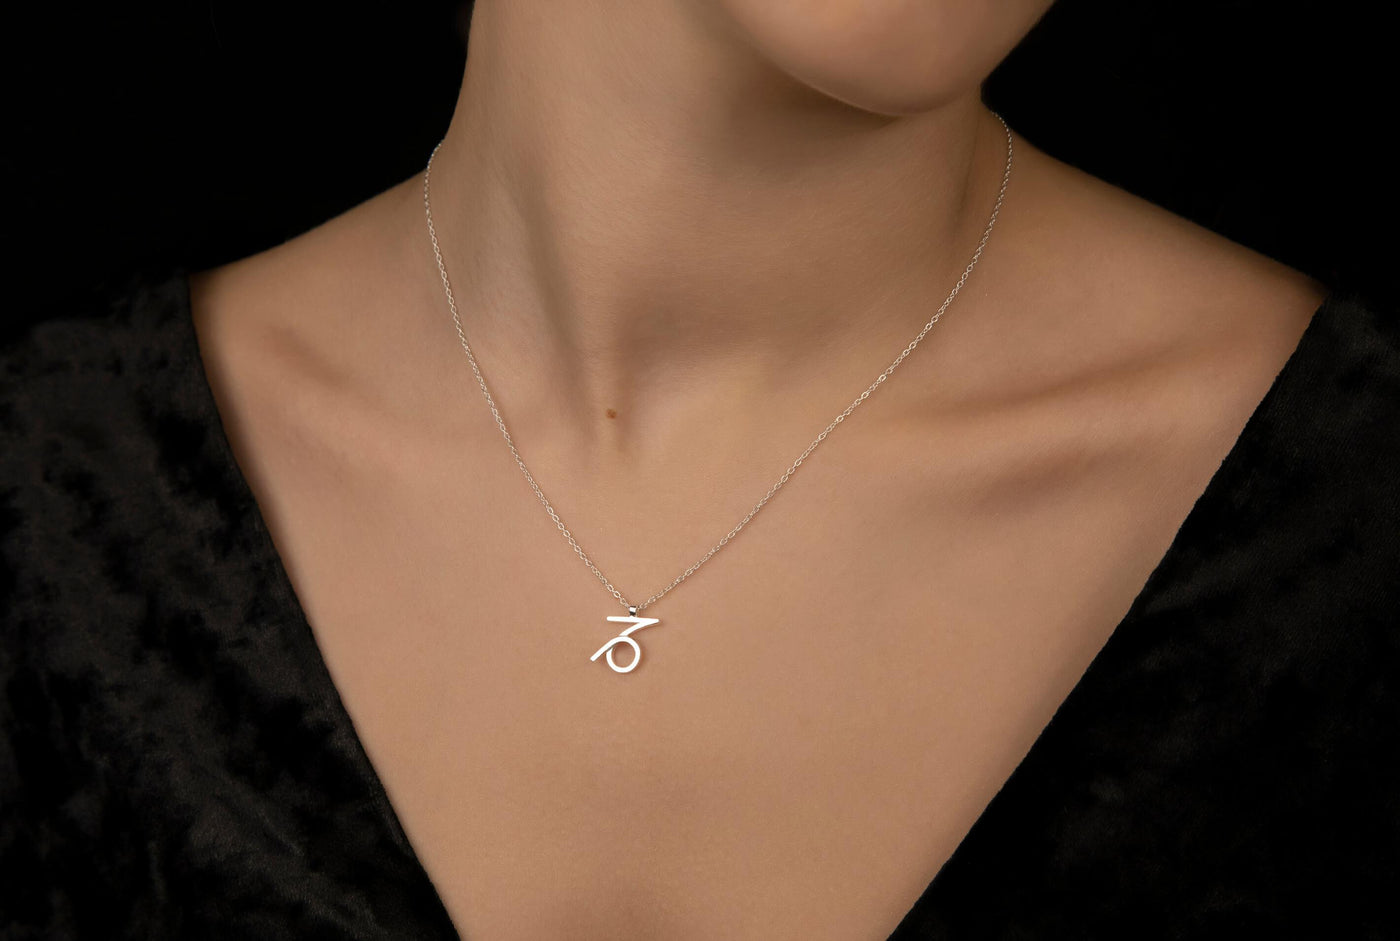 Unisex Capricorn Necklace in Sterling Silver 925